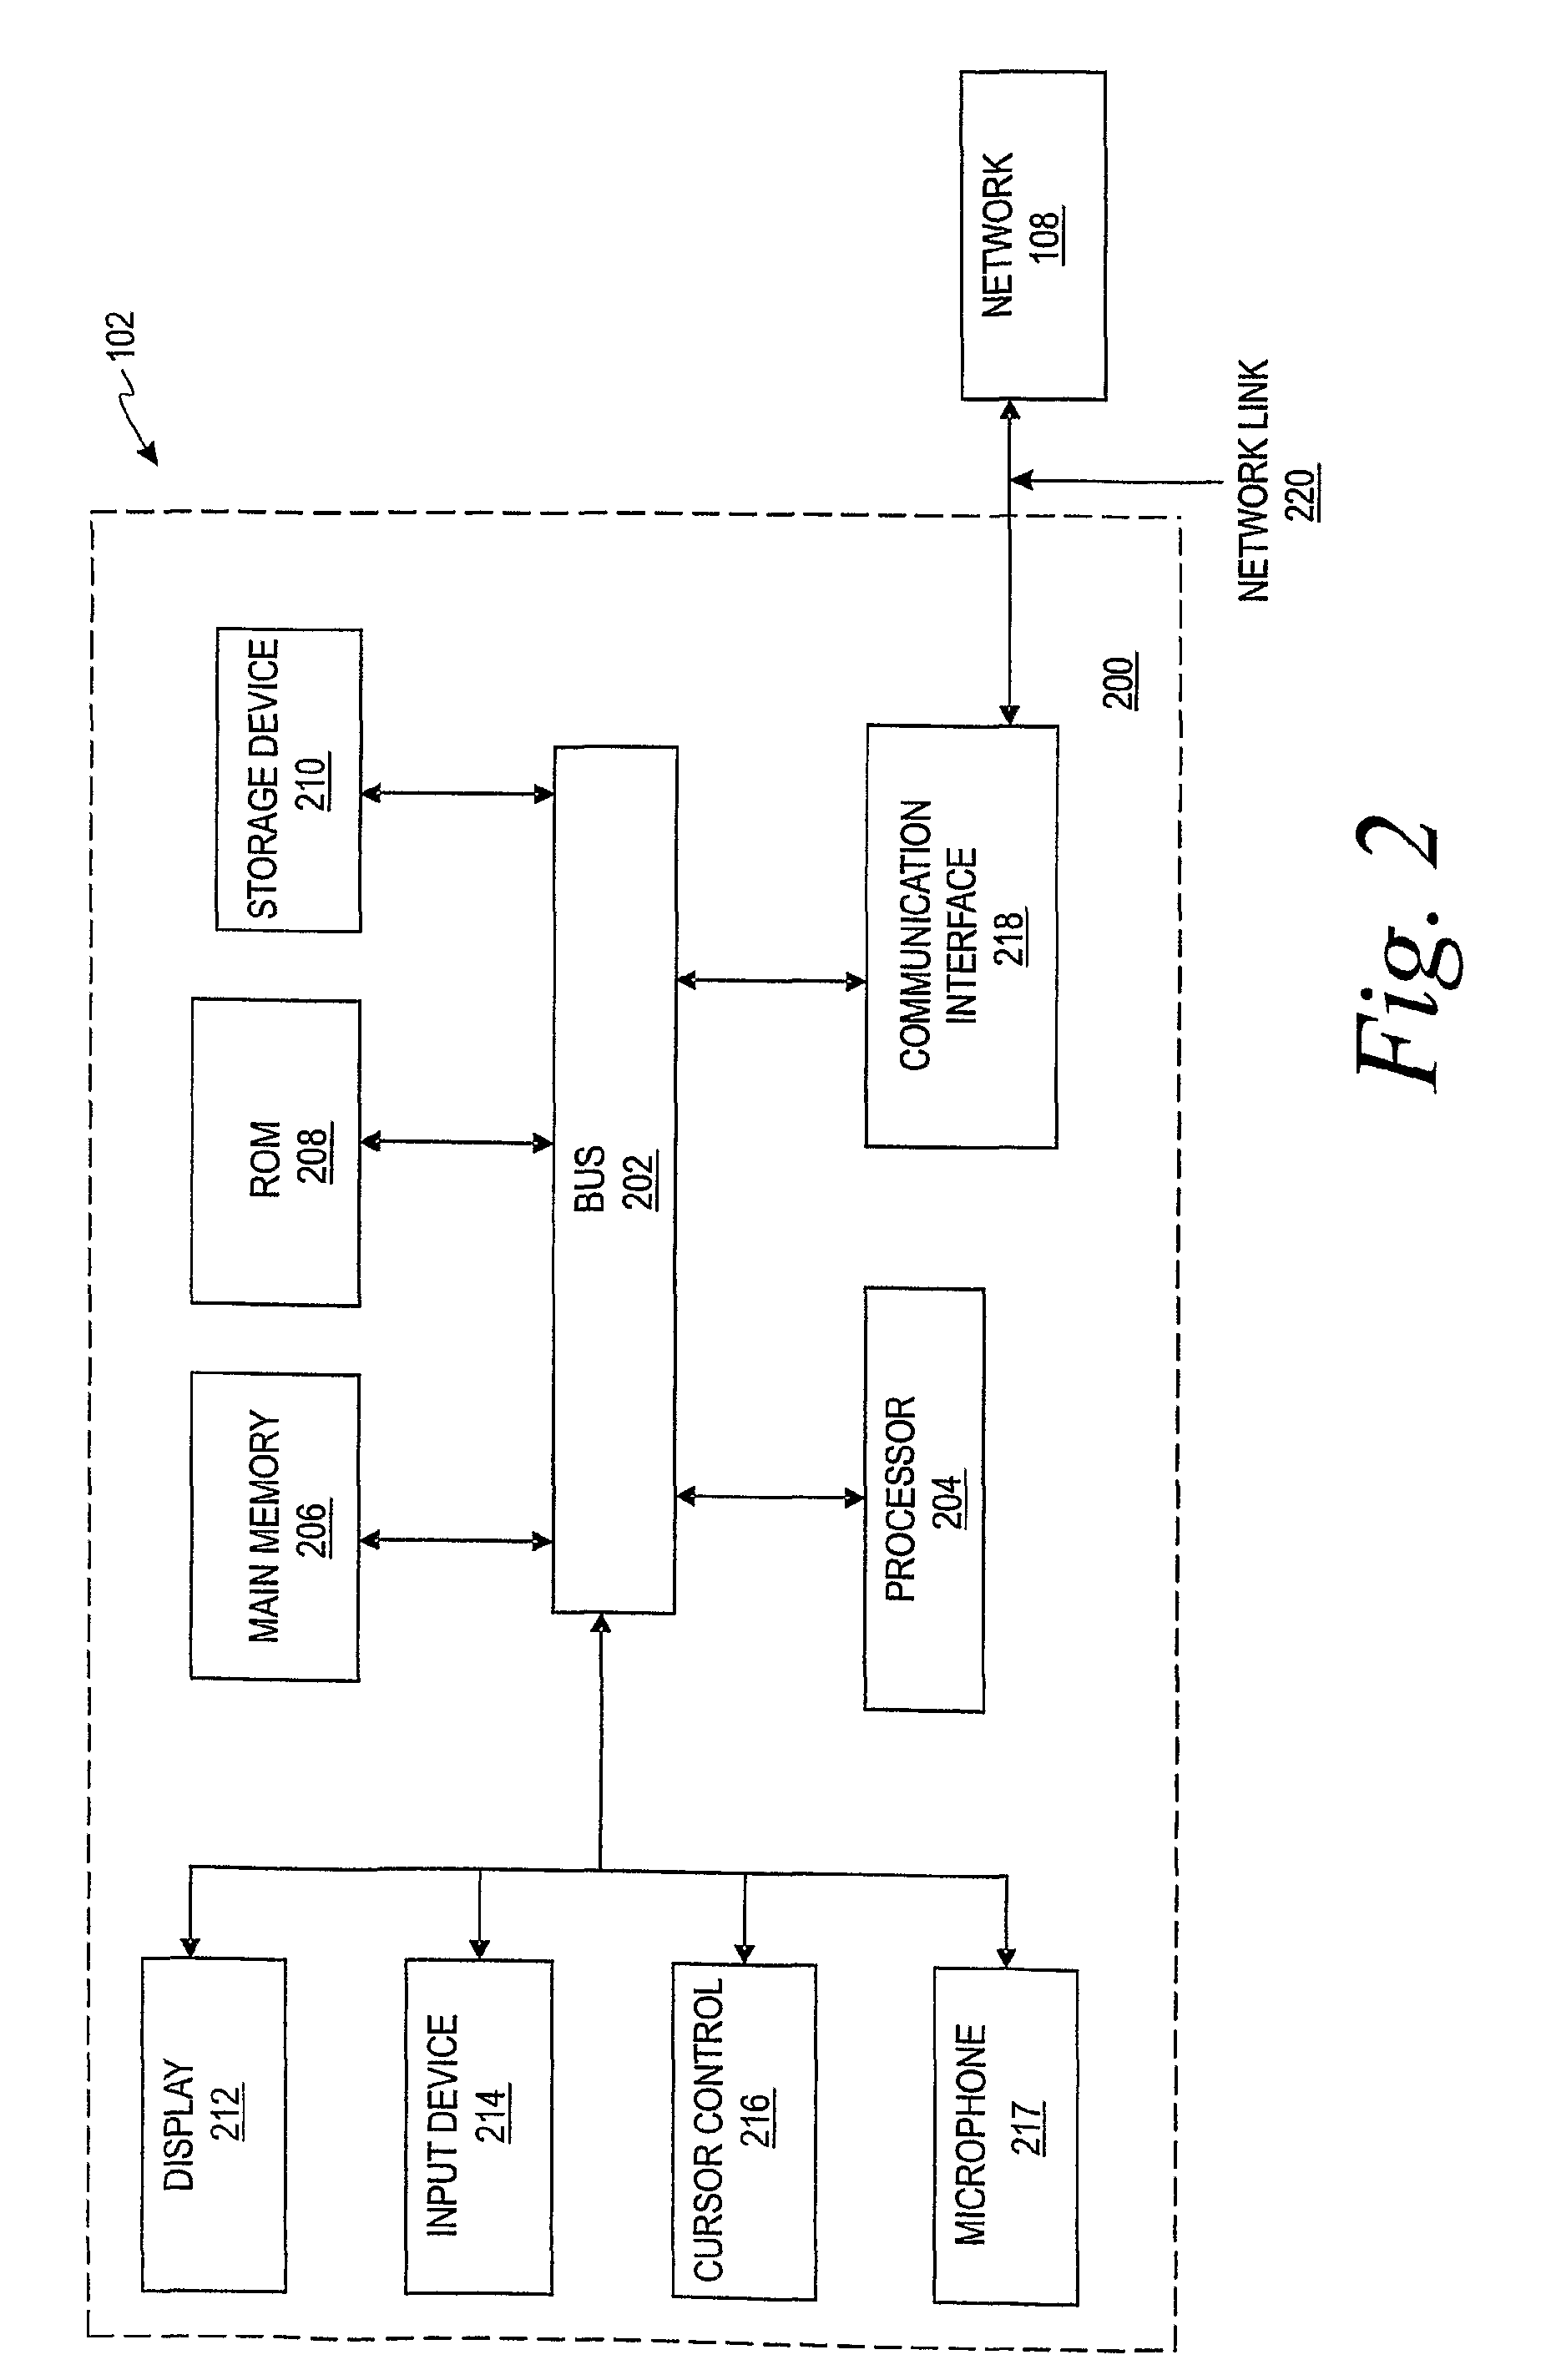 Methods and system for orchestrating services and data sharing on mobile devices